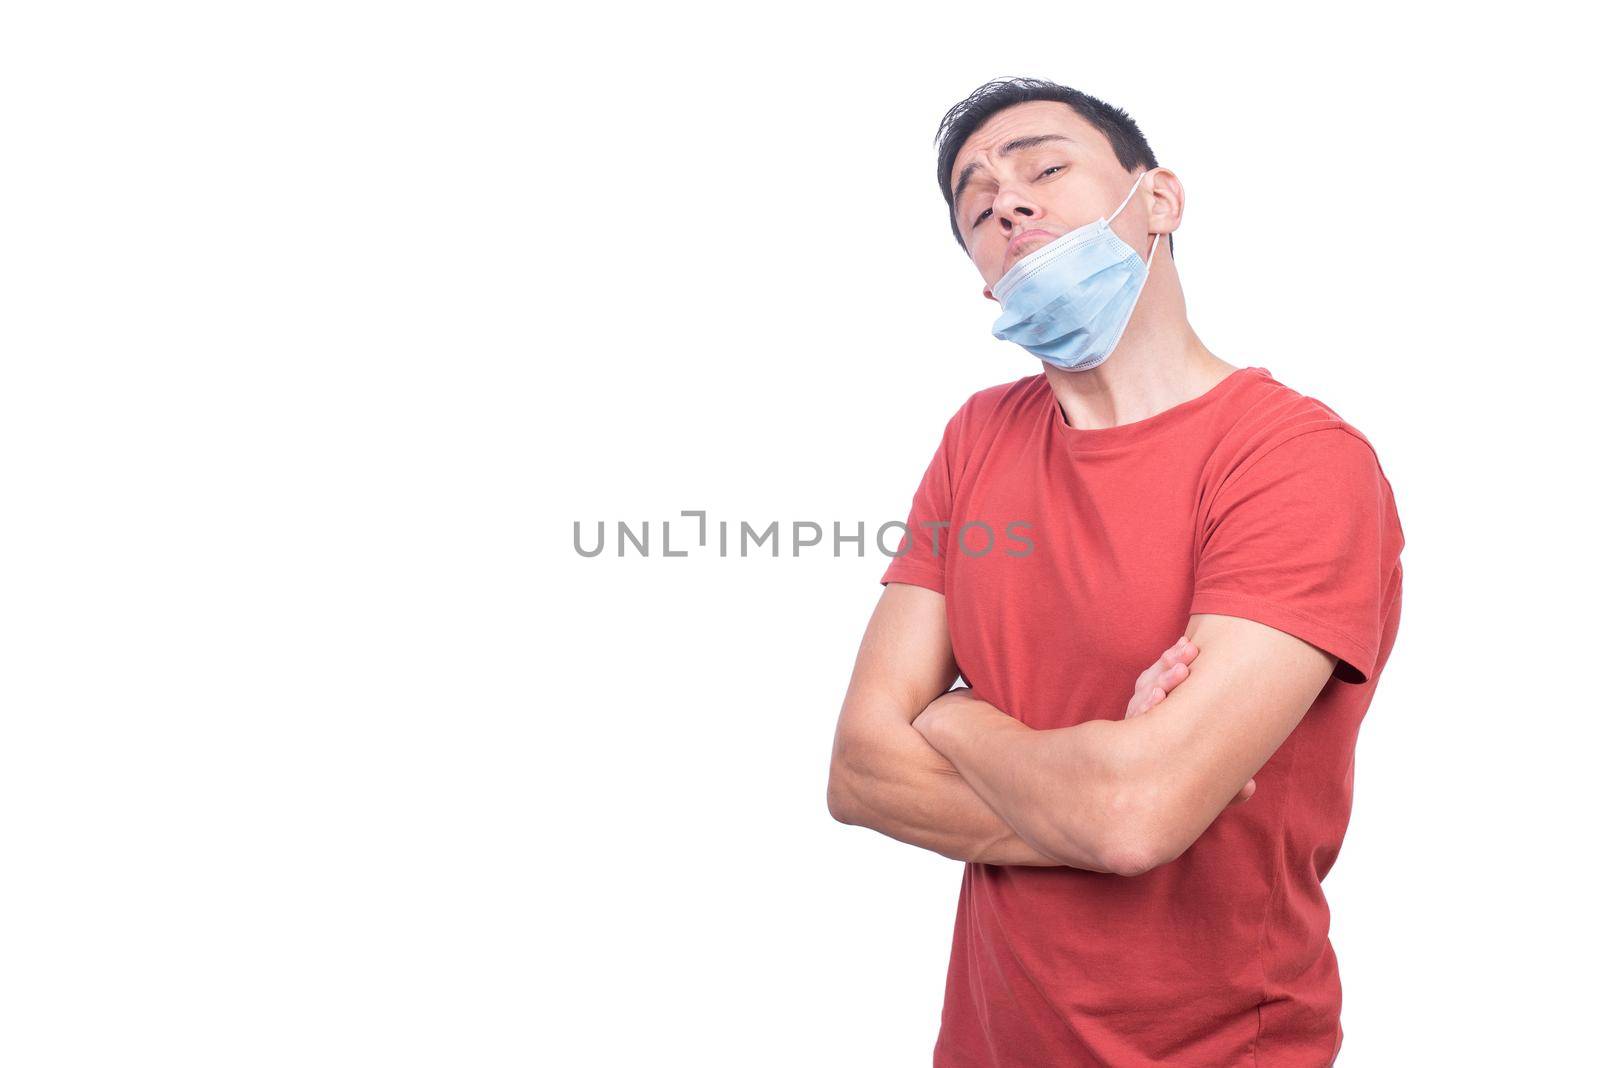 Irresponsible man with misplaced medical mask during COVID pandemic by ivanmoreno